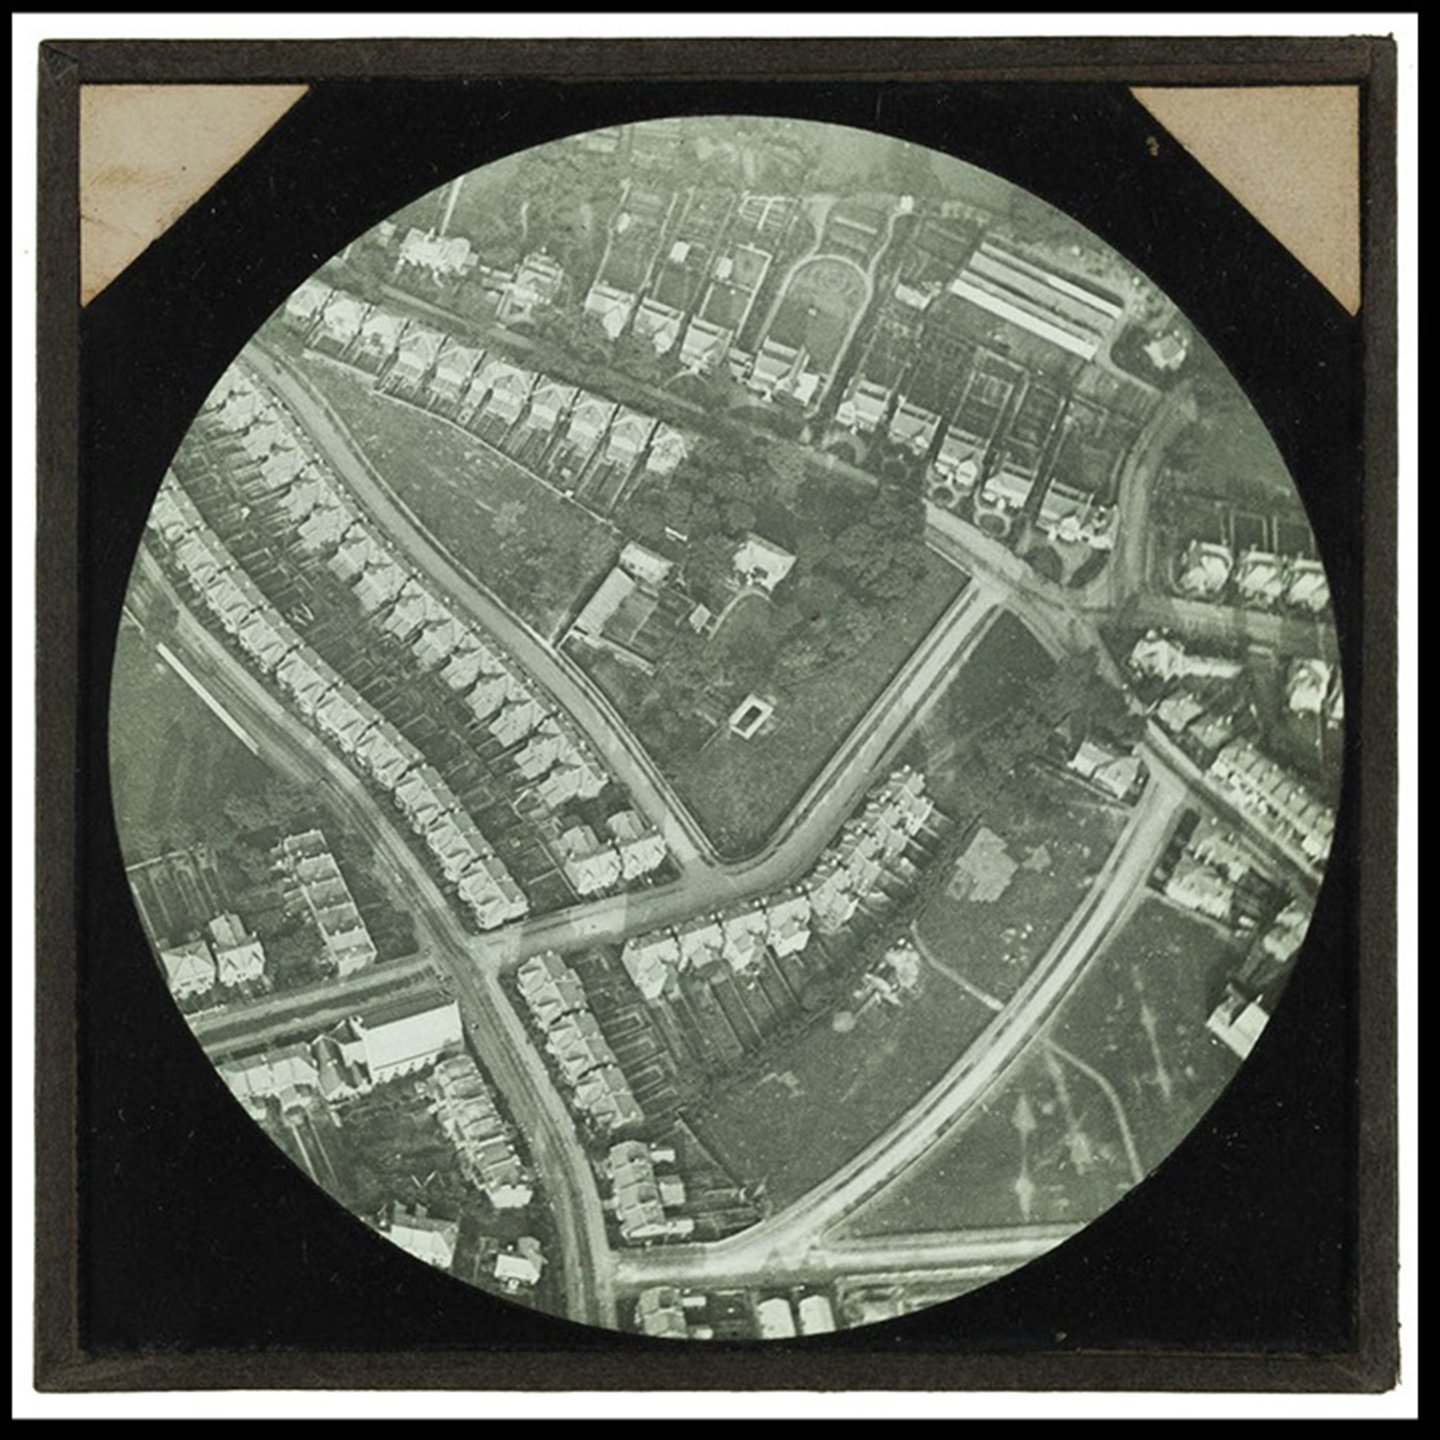 An aerial view of Clatford House and the surrounding streets, taken from 1900 feet